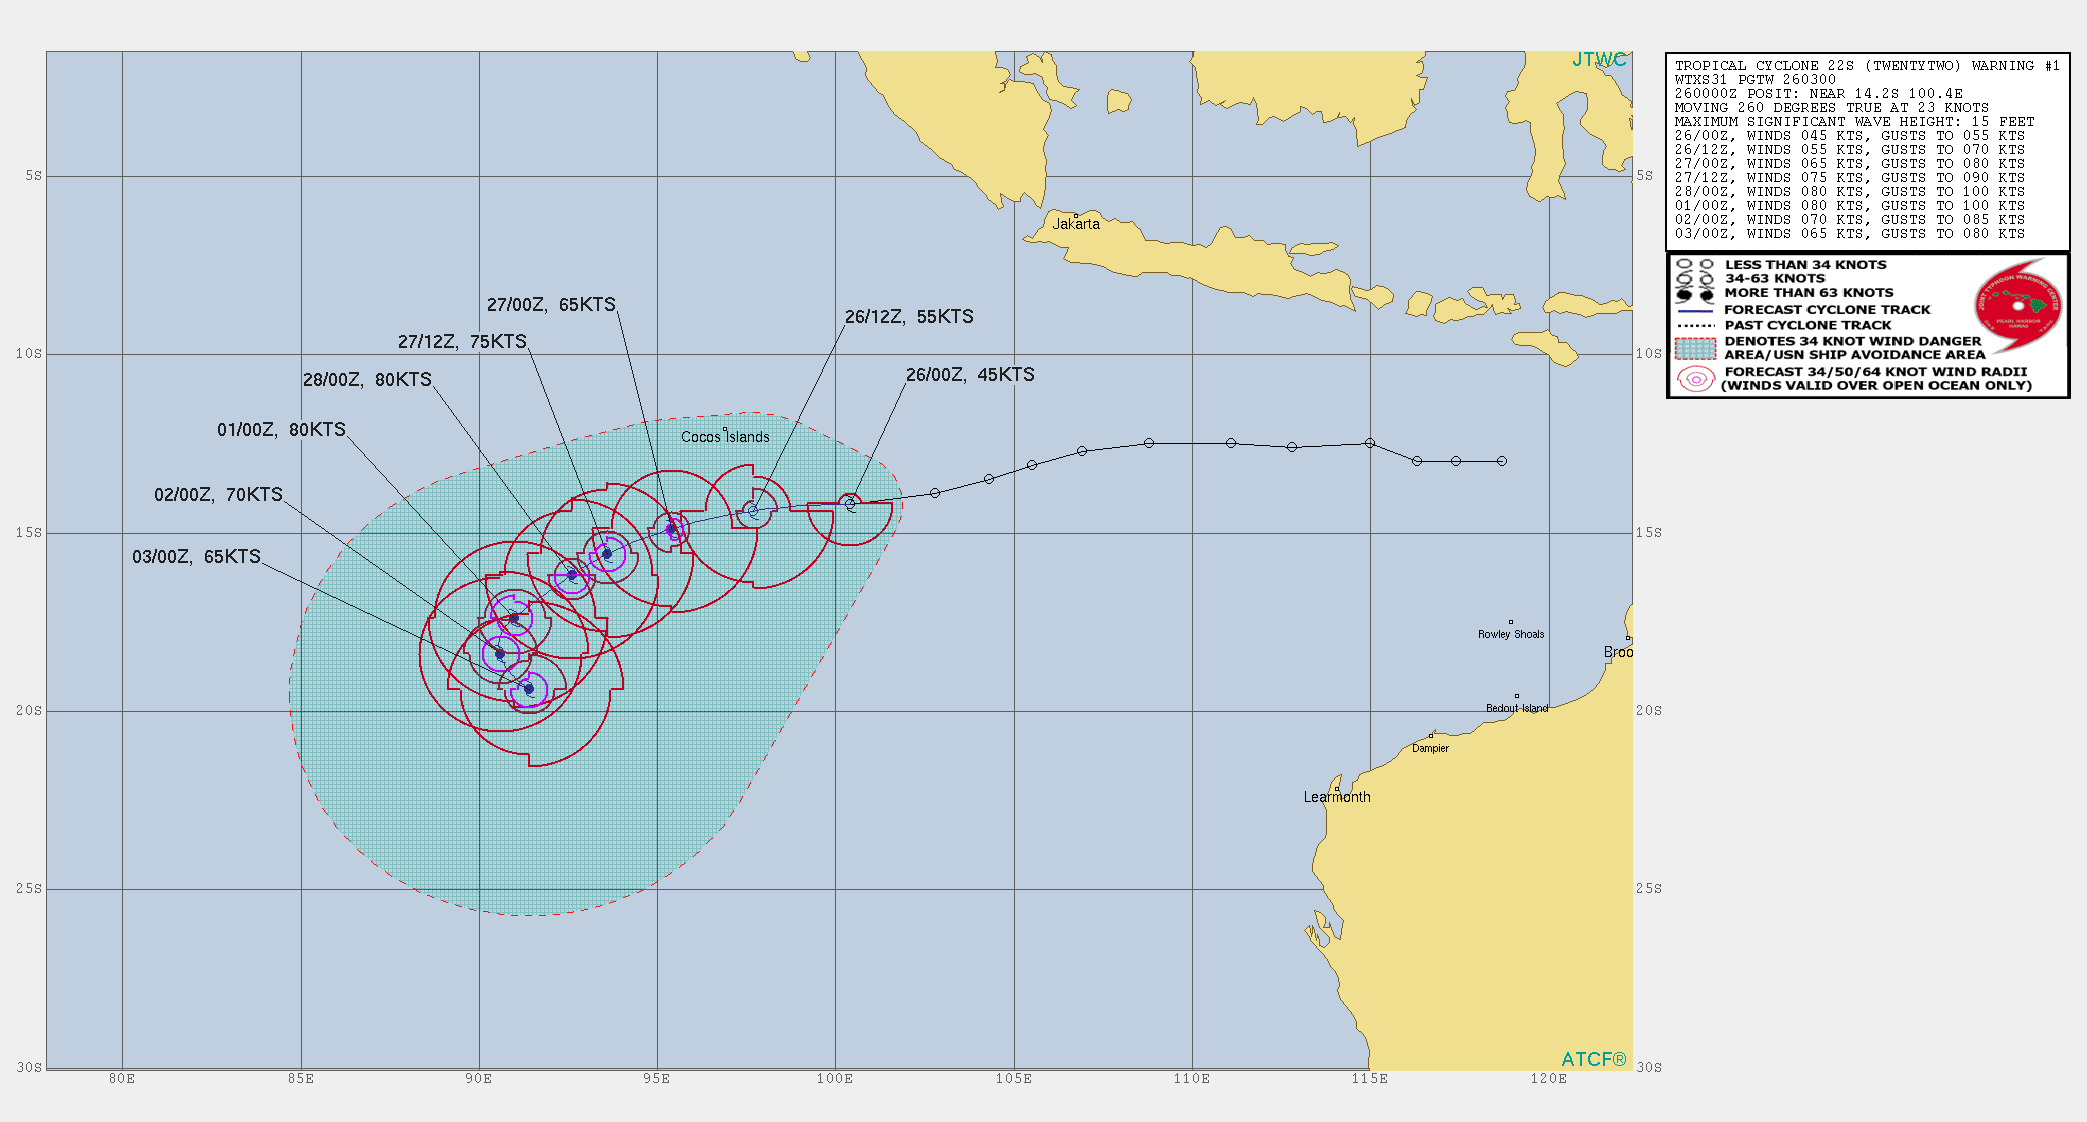 TC 22S. WARNING 1 ISSUED AT 26/03UTC. UPPER LEVEL ANALYSIS INDICATES THE SYSTEM RESIDING EQUATORWARD OF THE  SUBTROPICAL RIDGE (STR), ENVELOPED IN A SMALL REGION OF LOW TO  MODERATE (10-15 KNOTS) VERTICAL WIND SHEAR AND WARM SEA  SURFACE TEMPERATURES (28-29C). MODERATE EASTERLY FLOW CONTINUES TO  ENHANCE CONVECTION WEST OF THE LOW LEVEL CIRCULATION CENTER AND OVERALL INTENSIFICATION  PEAKING AT 80 KNOTS/CATEGORY 1 NEAR 48H. THE CYCLONE WILL CONTINUE TO  PROCEED ON A WEST-SOUTHWESTWARD TRACK AROUND THE STR TO THE SOUTH  THROUGH 72H. THEREAFTER, EXPECT THE SYSTEM TO TAKE A MORE  SOUTHERLY TURN AS IT BEGINS TO ROUND THE RIDGE AXIS, THEN MOVE  SOUTHEASTWARD THROUGH THE FORECAST PERIOD. AS THE SYSTEM TURNS TO  THE SOUTHEAST IT WILL ENCOUNTER INCREASING WIND SHEAR ASSOCIATED WITH THE  MID-LATITUDE WESTERLIES AND BEGIN TO WEAKEN THE SYSTEM AFTER TAU  120H.